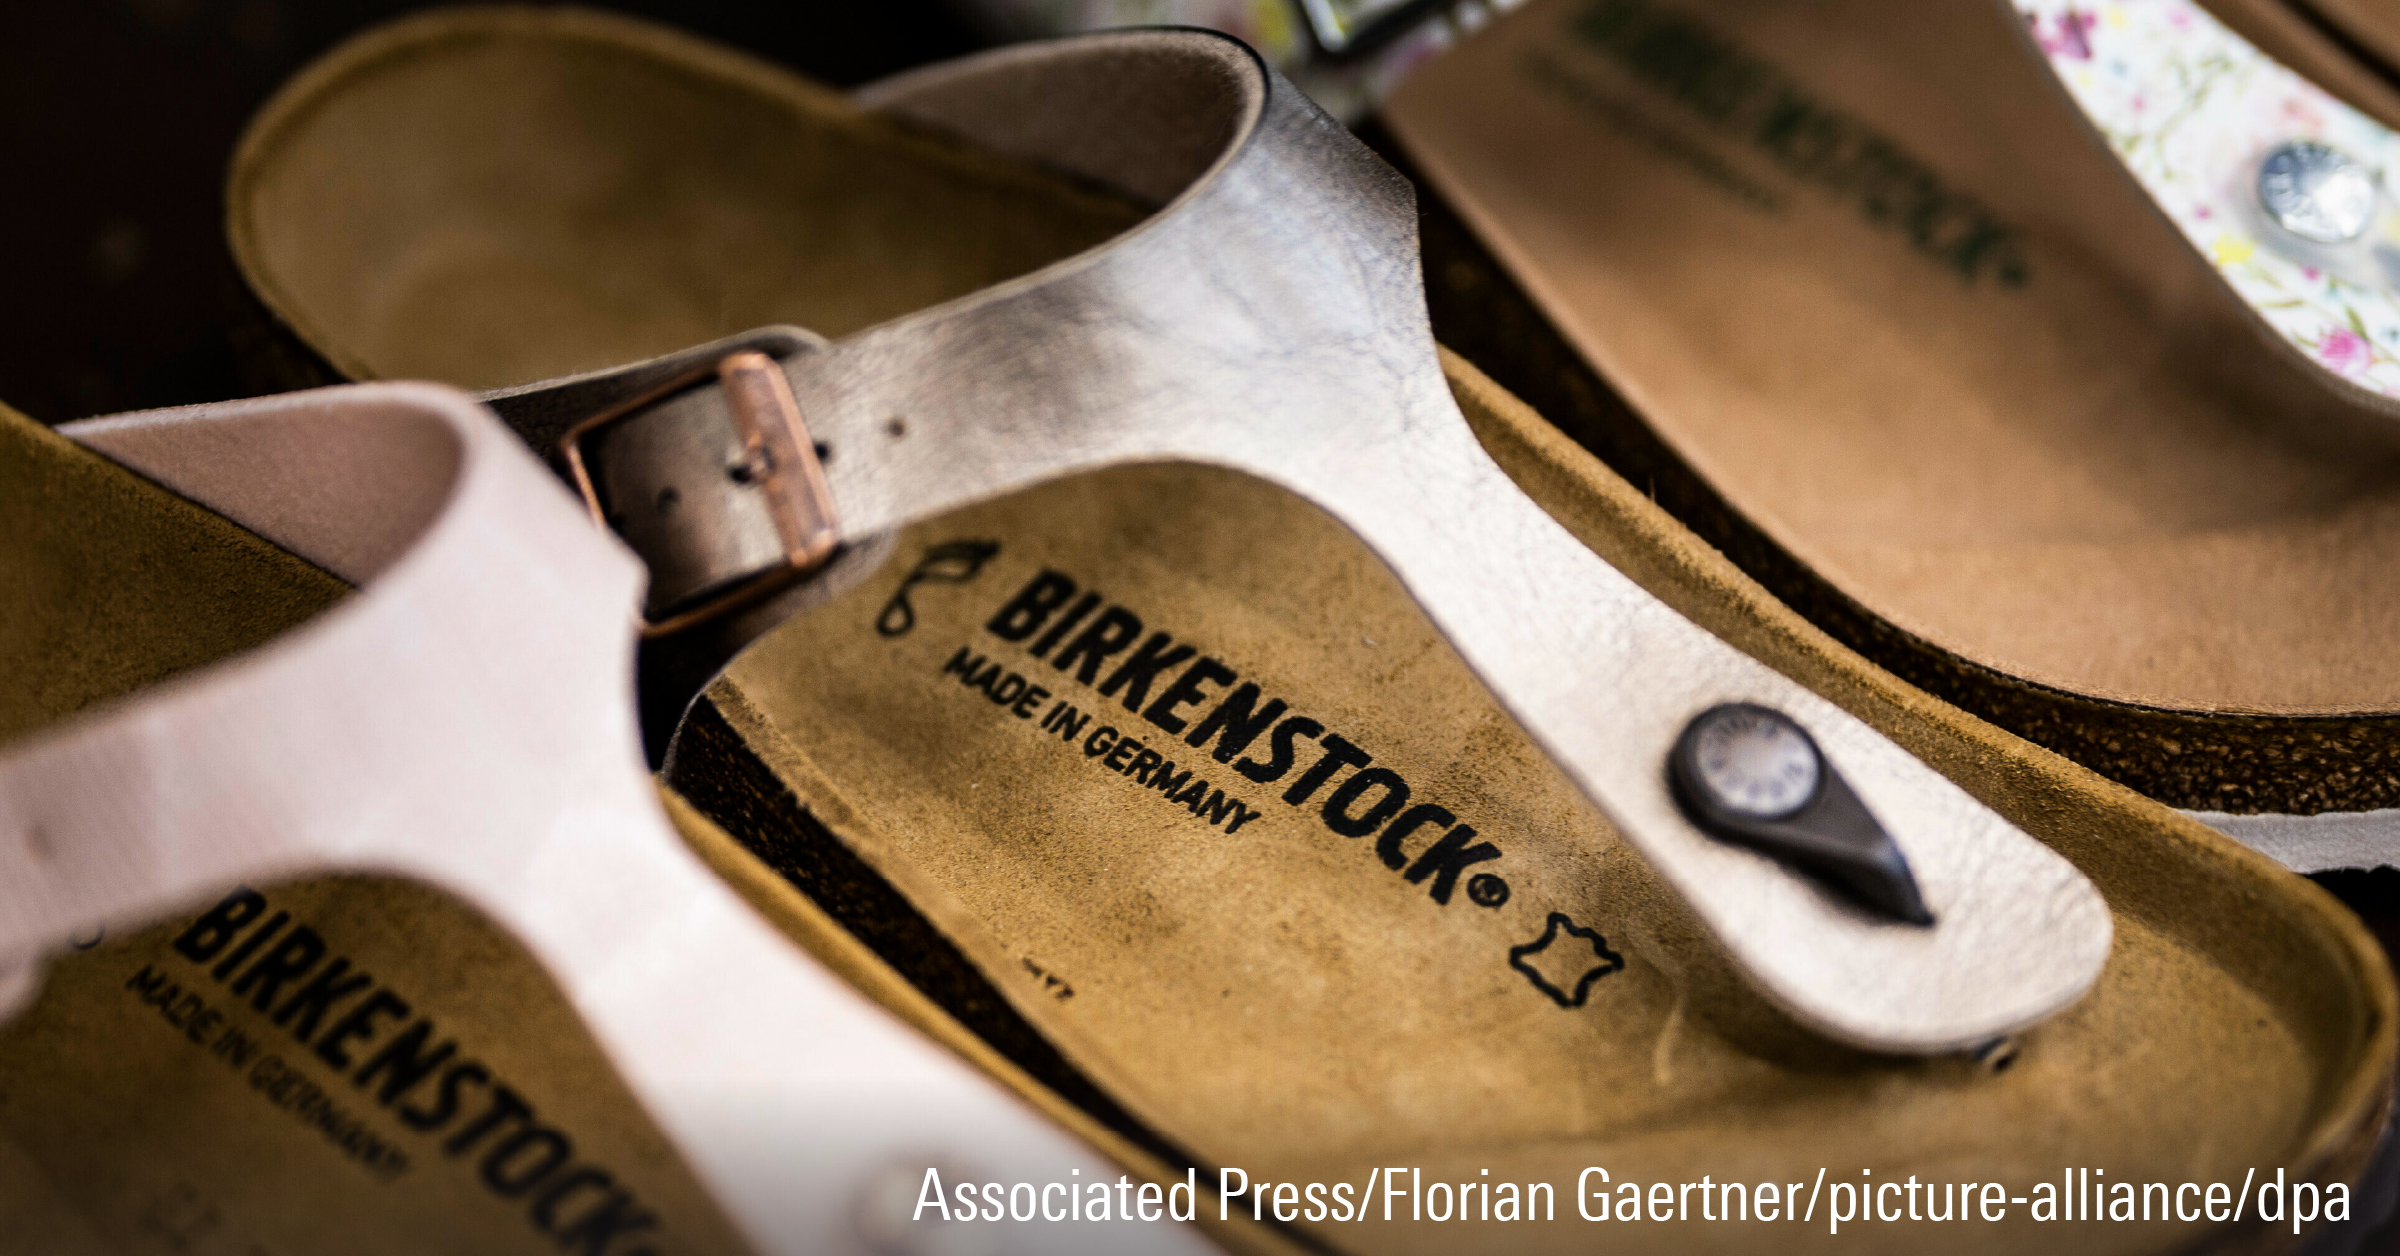 Birkenstock, German Maker of Iconic Sandals, Files for I.P.O. in New York -  The New York Times